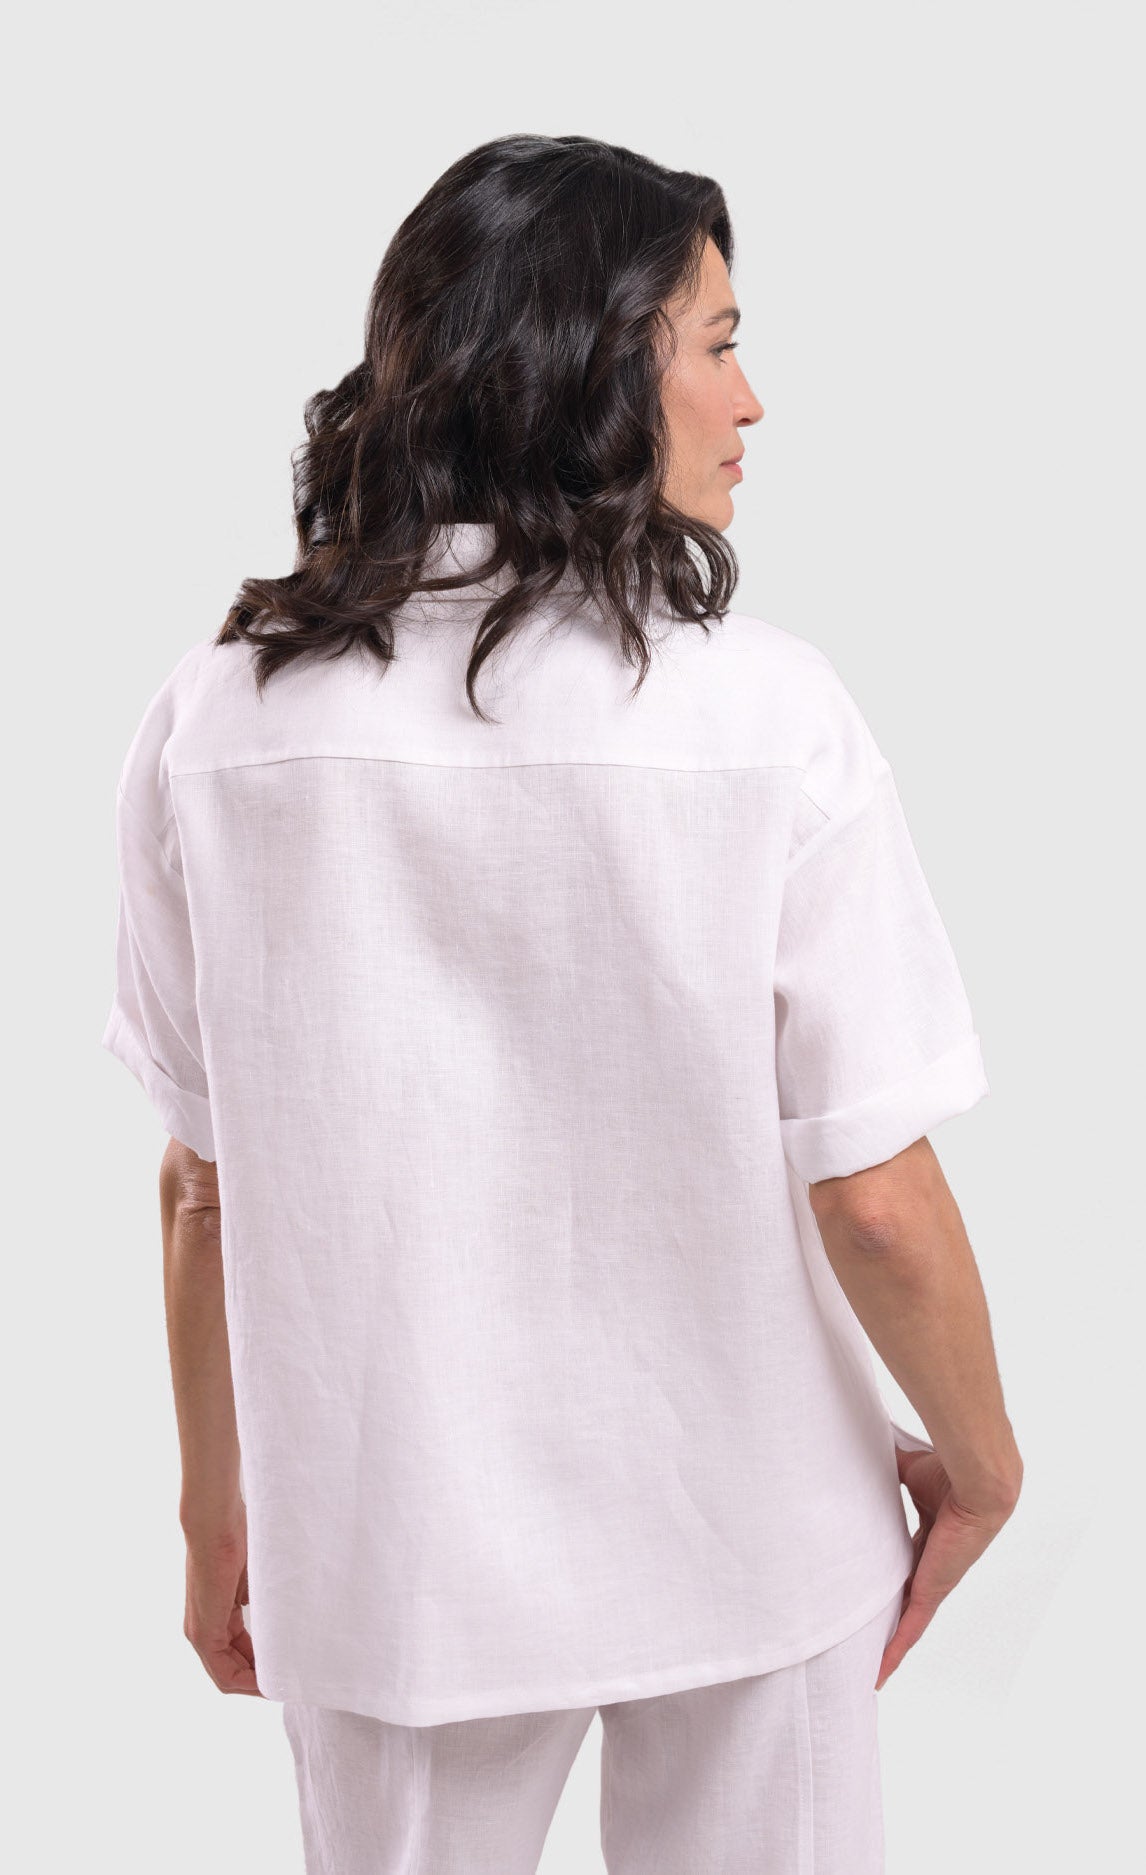 Back top half view of a woman wearing the alembika white flowers shirt. This shirt is white with a screen print of monochrome flowers on a square on the front. The shirt has short sleeves that are rolled up, a button down front, and a shirt collar. 